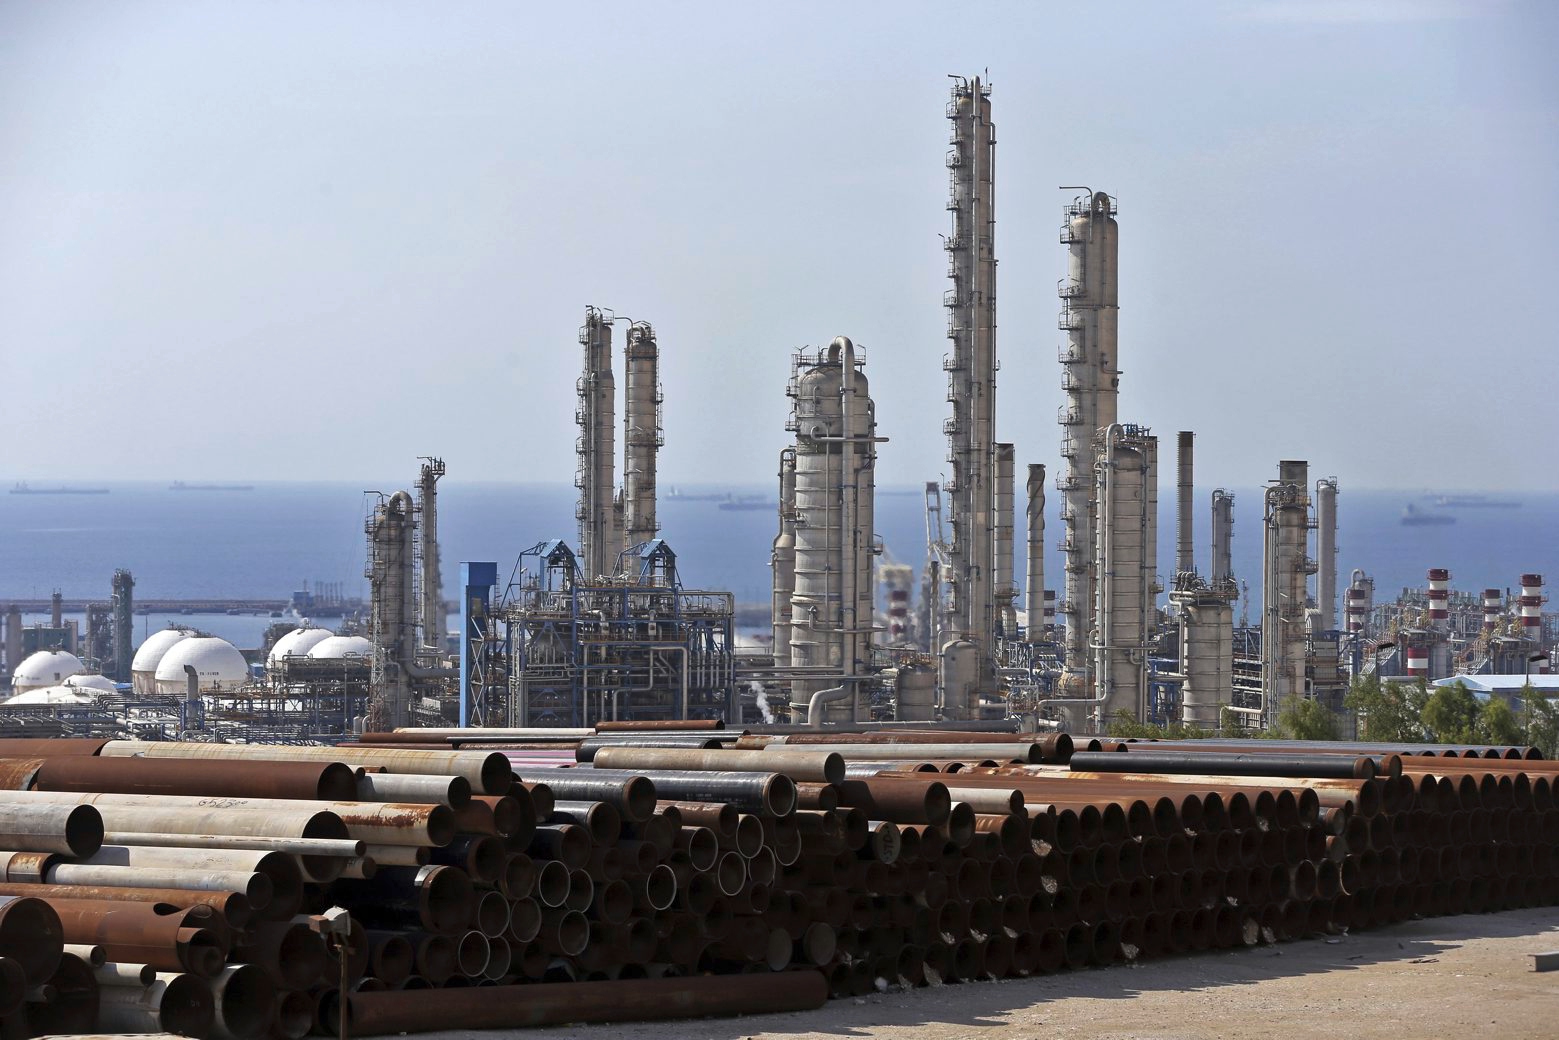 FILE - This Nov. 19, 2015,c file photo, shows a general view of a petrochemical complex in the South Pars gas field in Asalouyeh, Iran, on the northern coast of Persian Gulf. The U.S. airstrike that killed a prominent Iranian general in Baghdad raises tensions even higher between Tehran and Washington after months of trading attacks and threats across the wider Middle East. (AP Photo/Ebrahim Noroozi) Explains Iran US